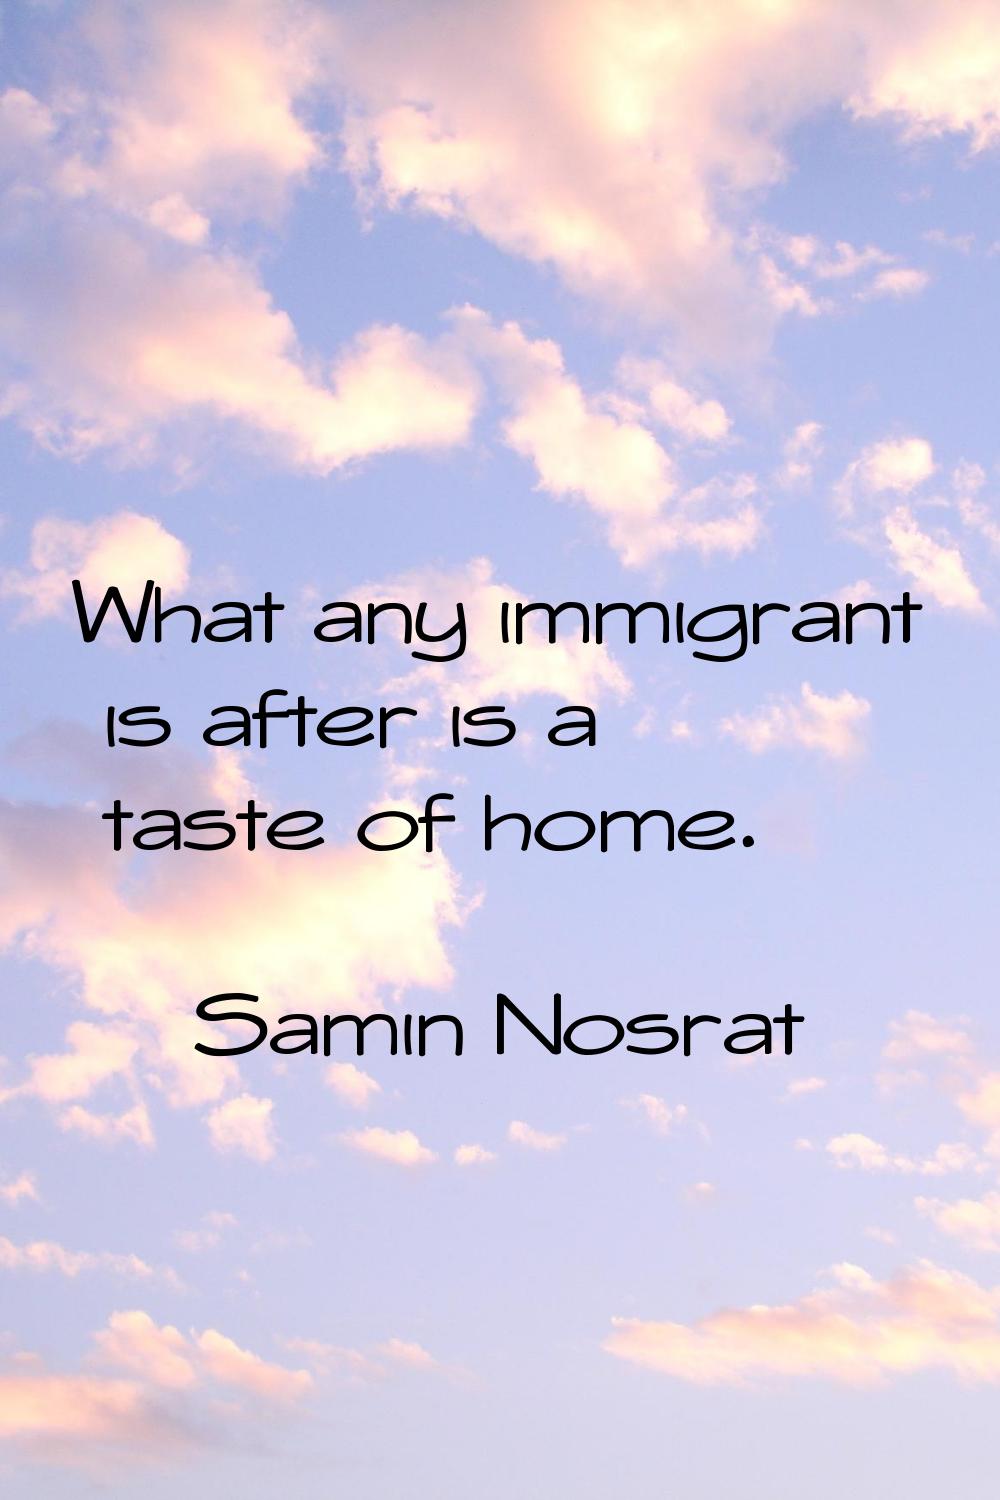 What any immigrant is after is a taste of home.